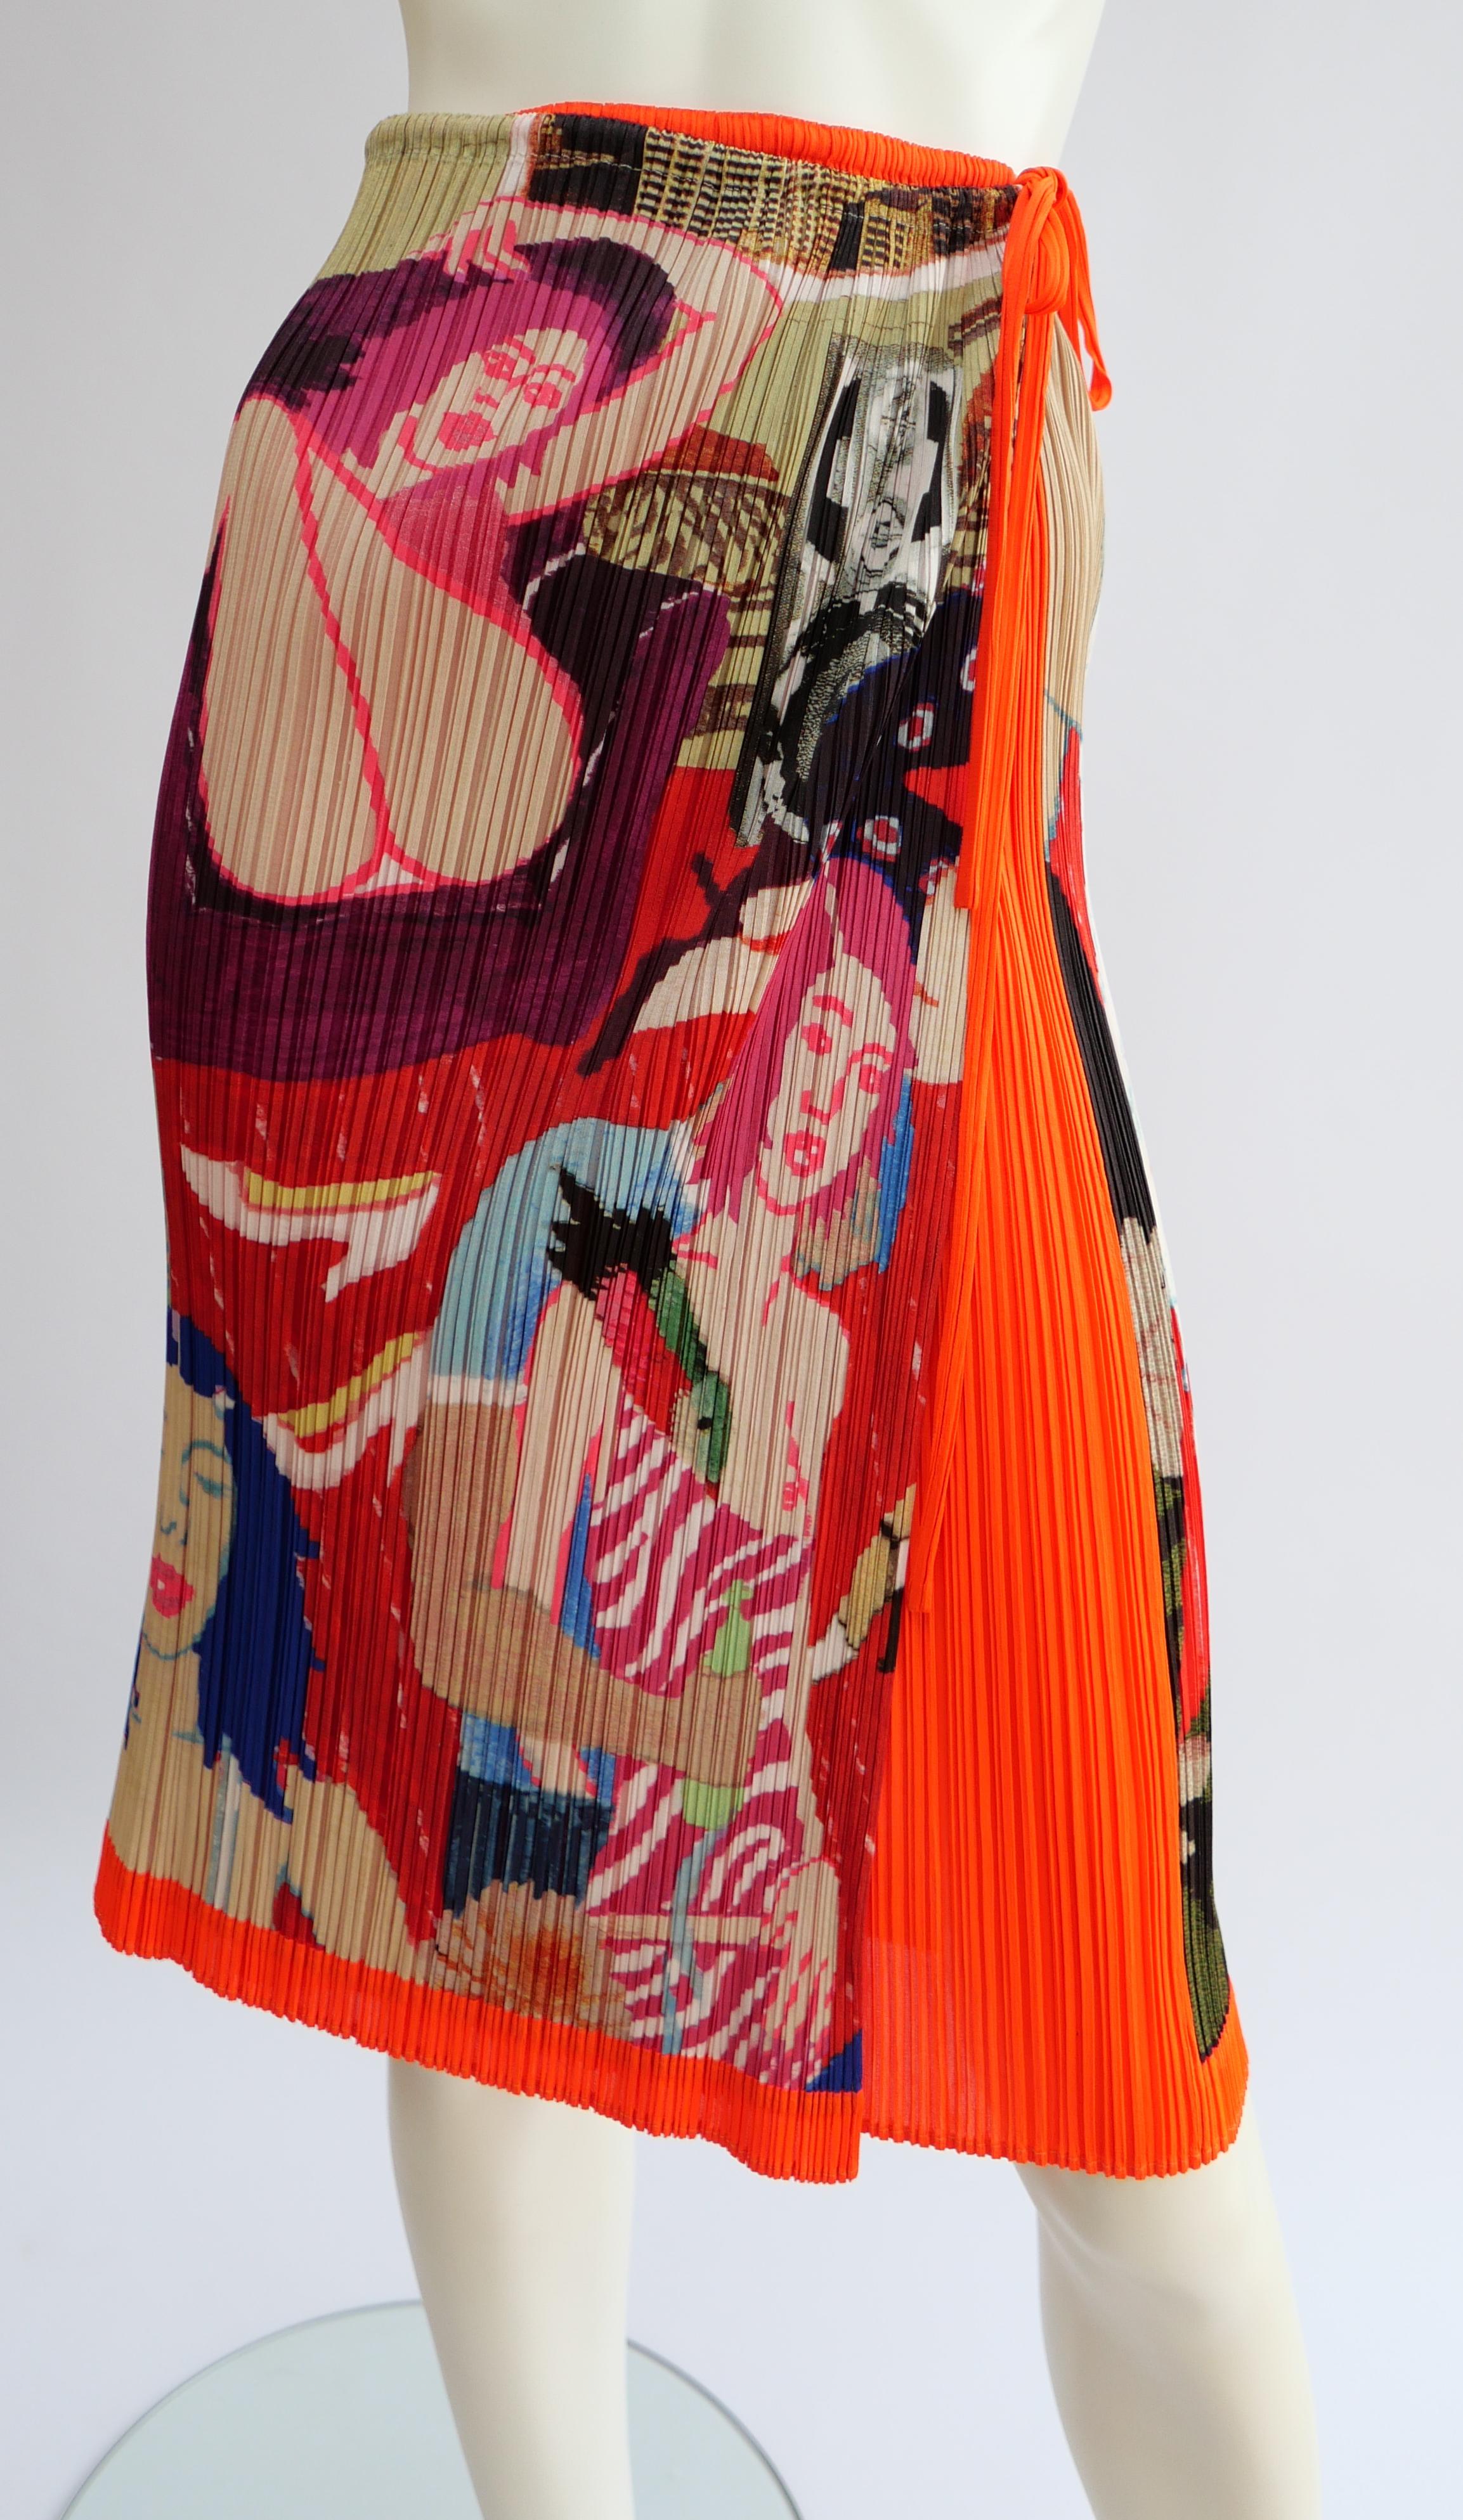  Issey Miyake Skirt With Art Illustration Print For Sale 2